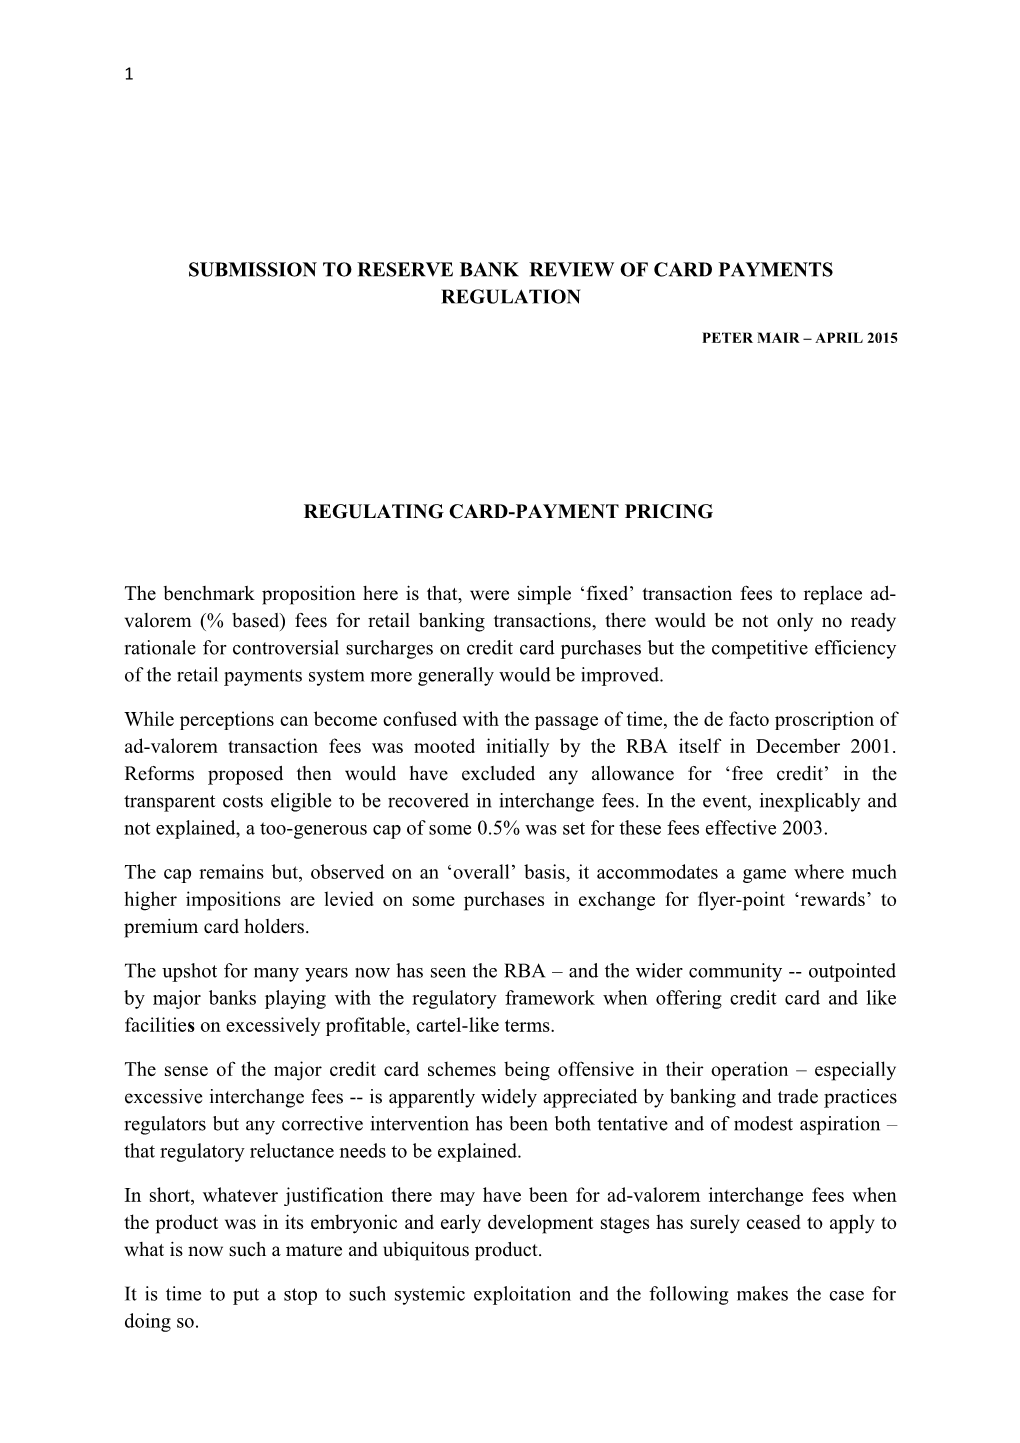 Submission to Reserve Bank Review of Card Payments Regulation